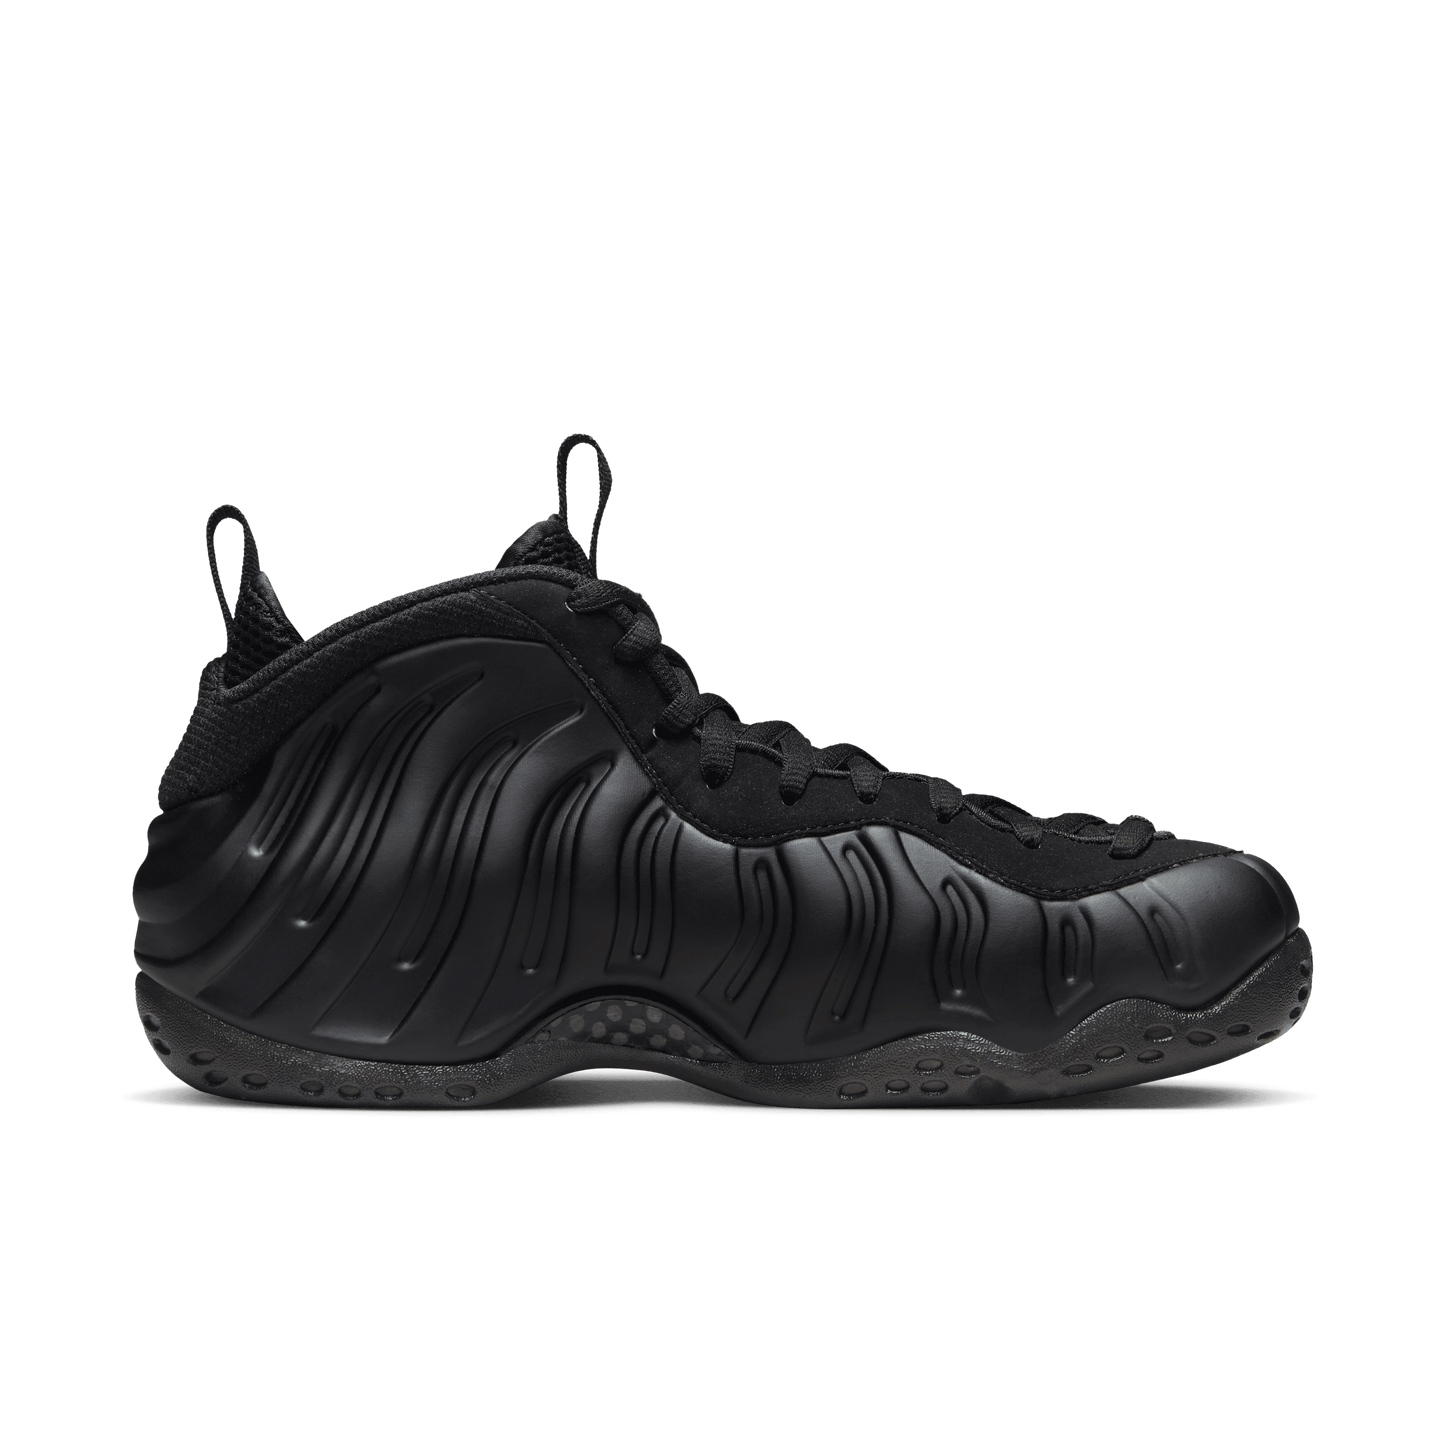 Nike Air Foamposite One Black Anthracite